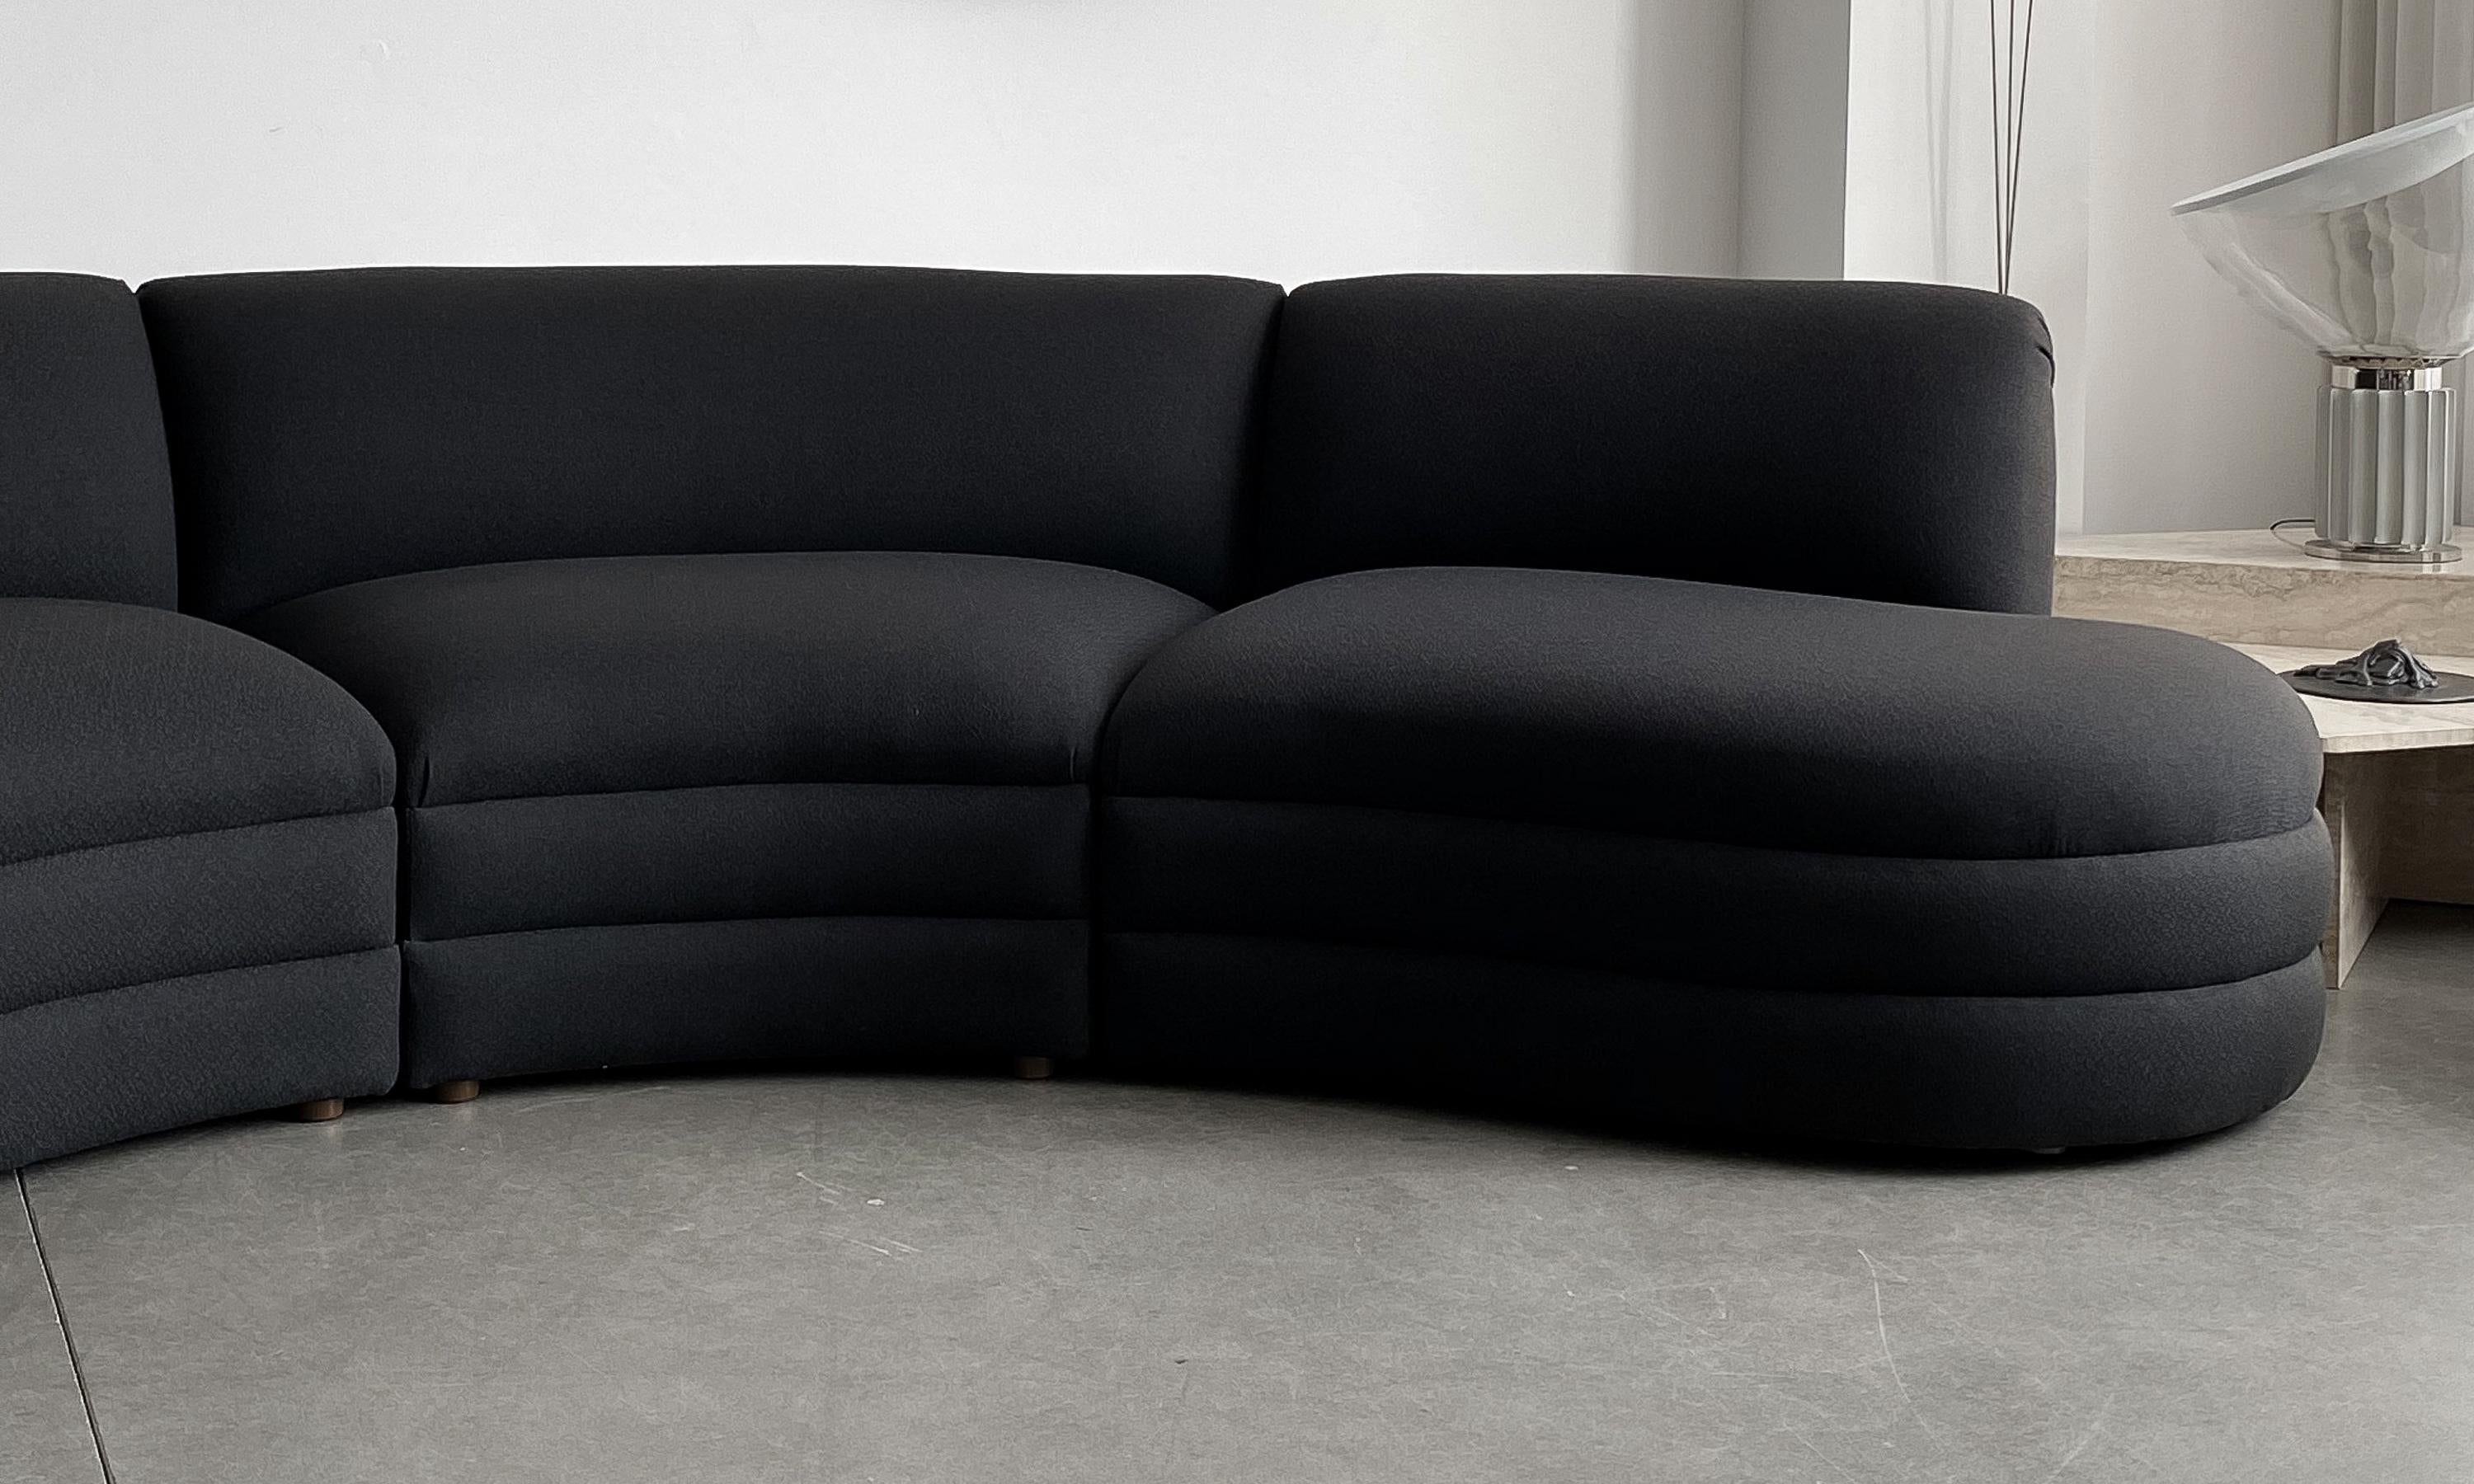 Four Piece Curved Sectional Sofa Attributed to Vladimir Kagan 3